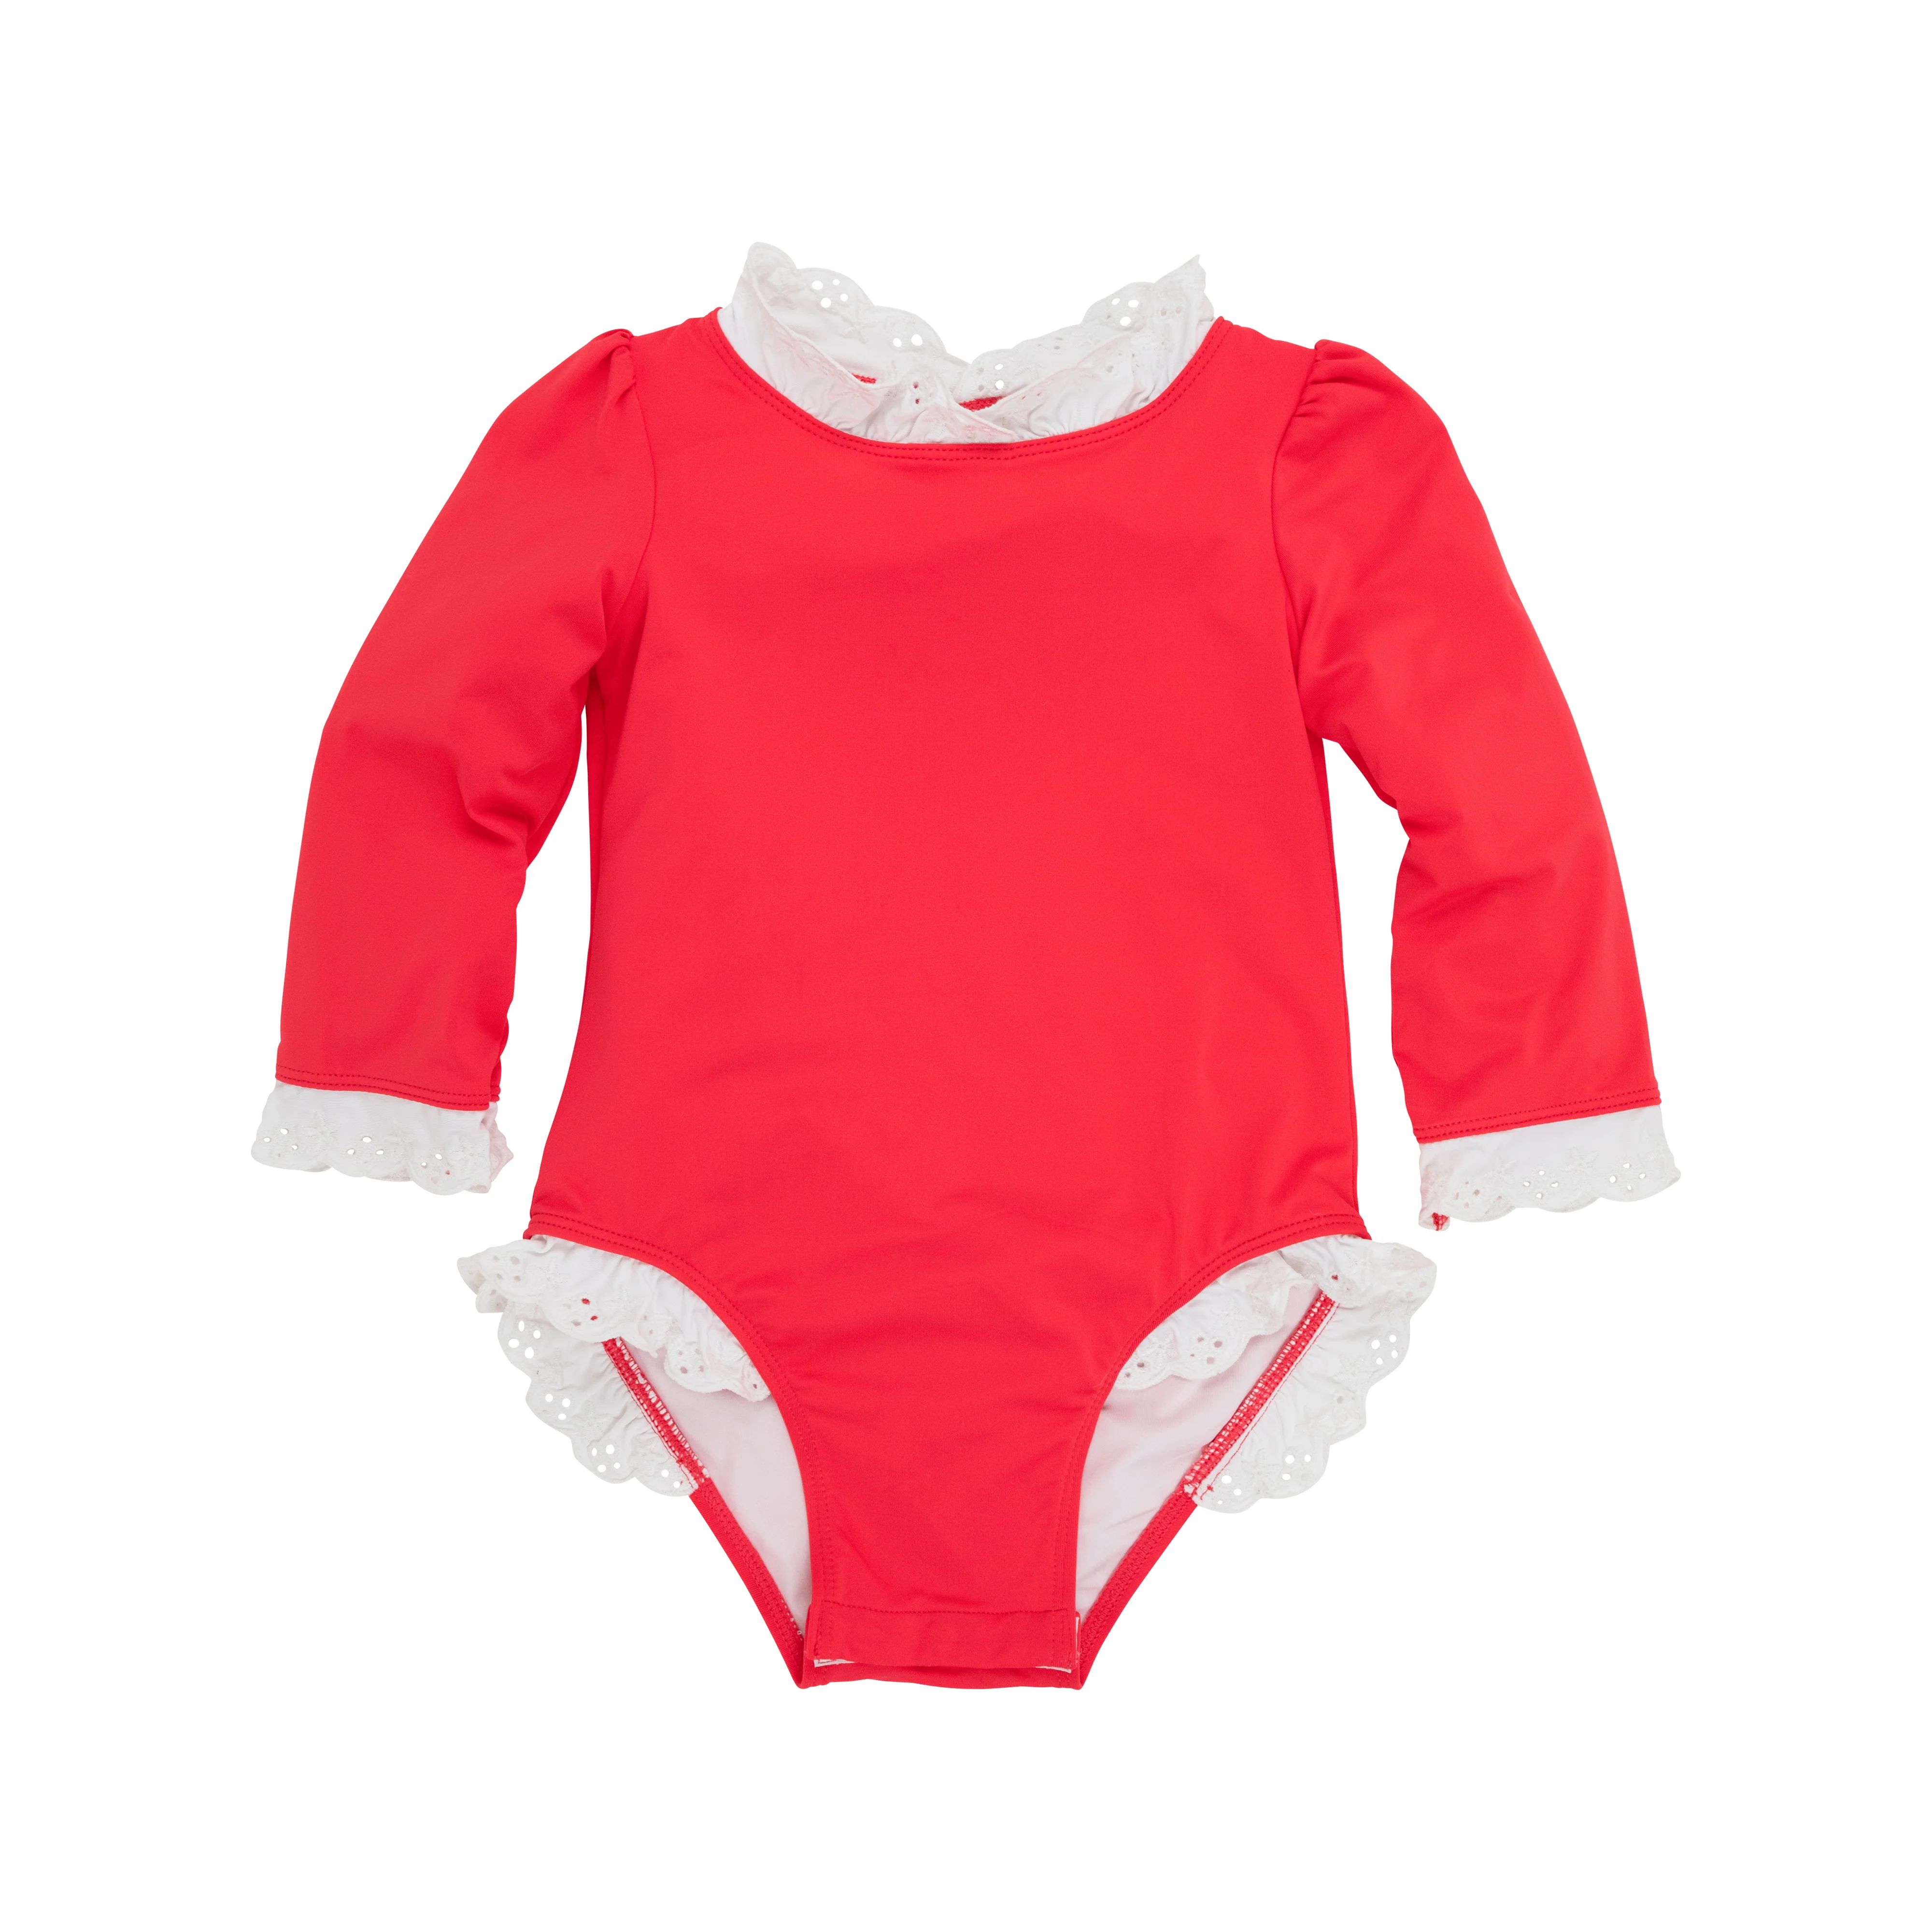 Sarasota Surf Suit - Richmond Red with Worth Avenue White | The Beaufort Bonnet Company